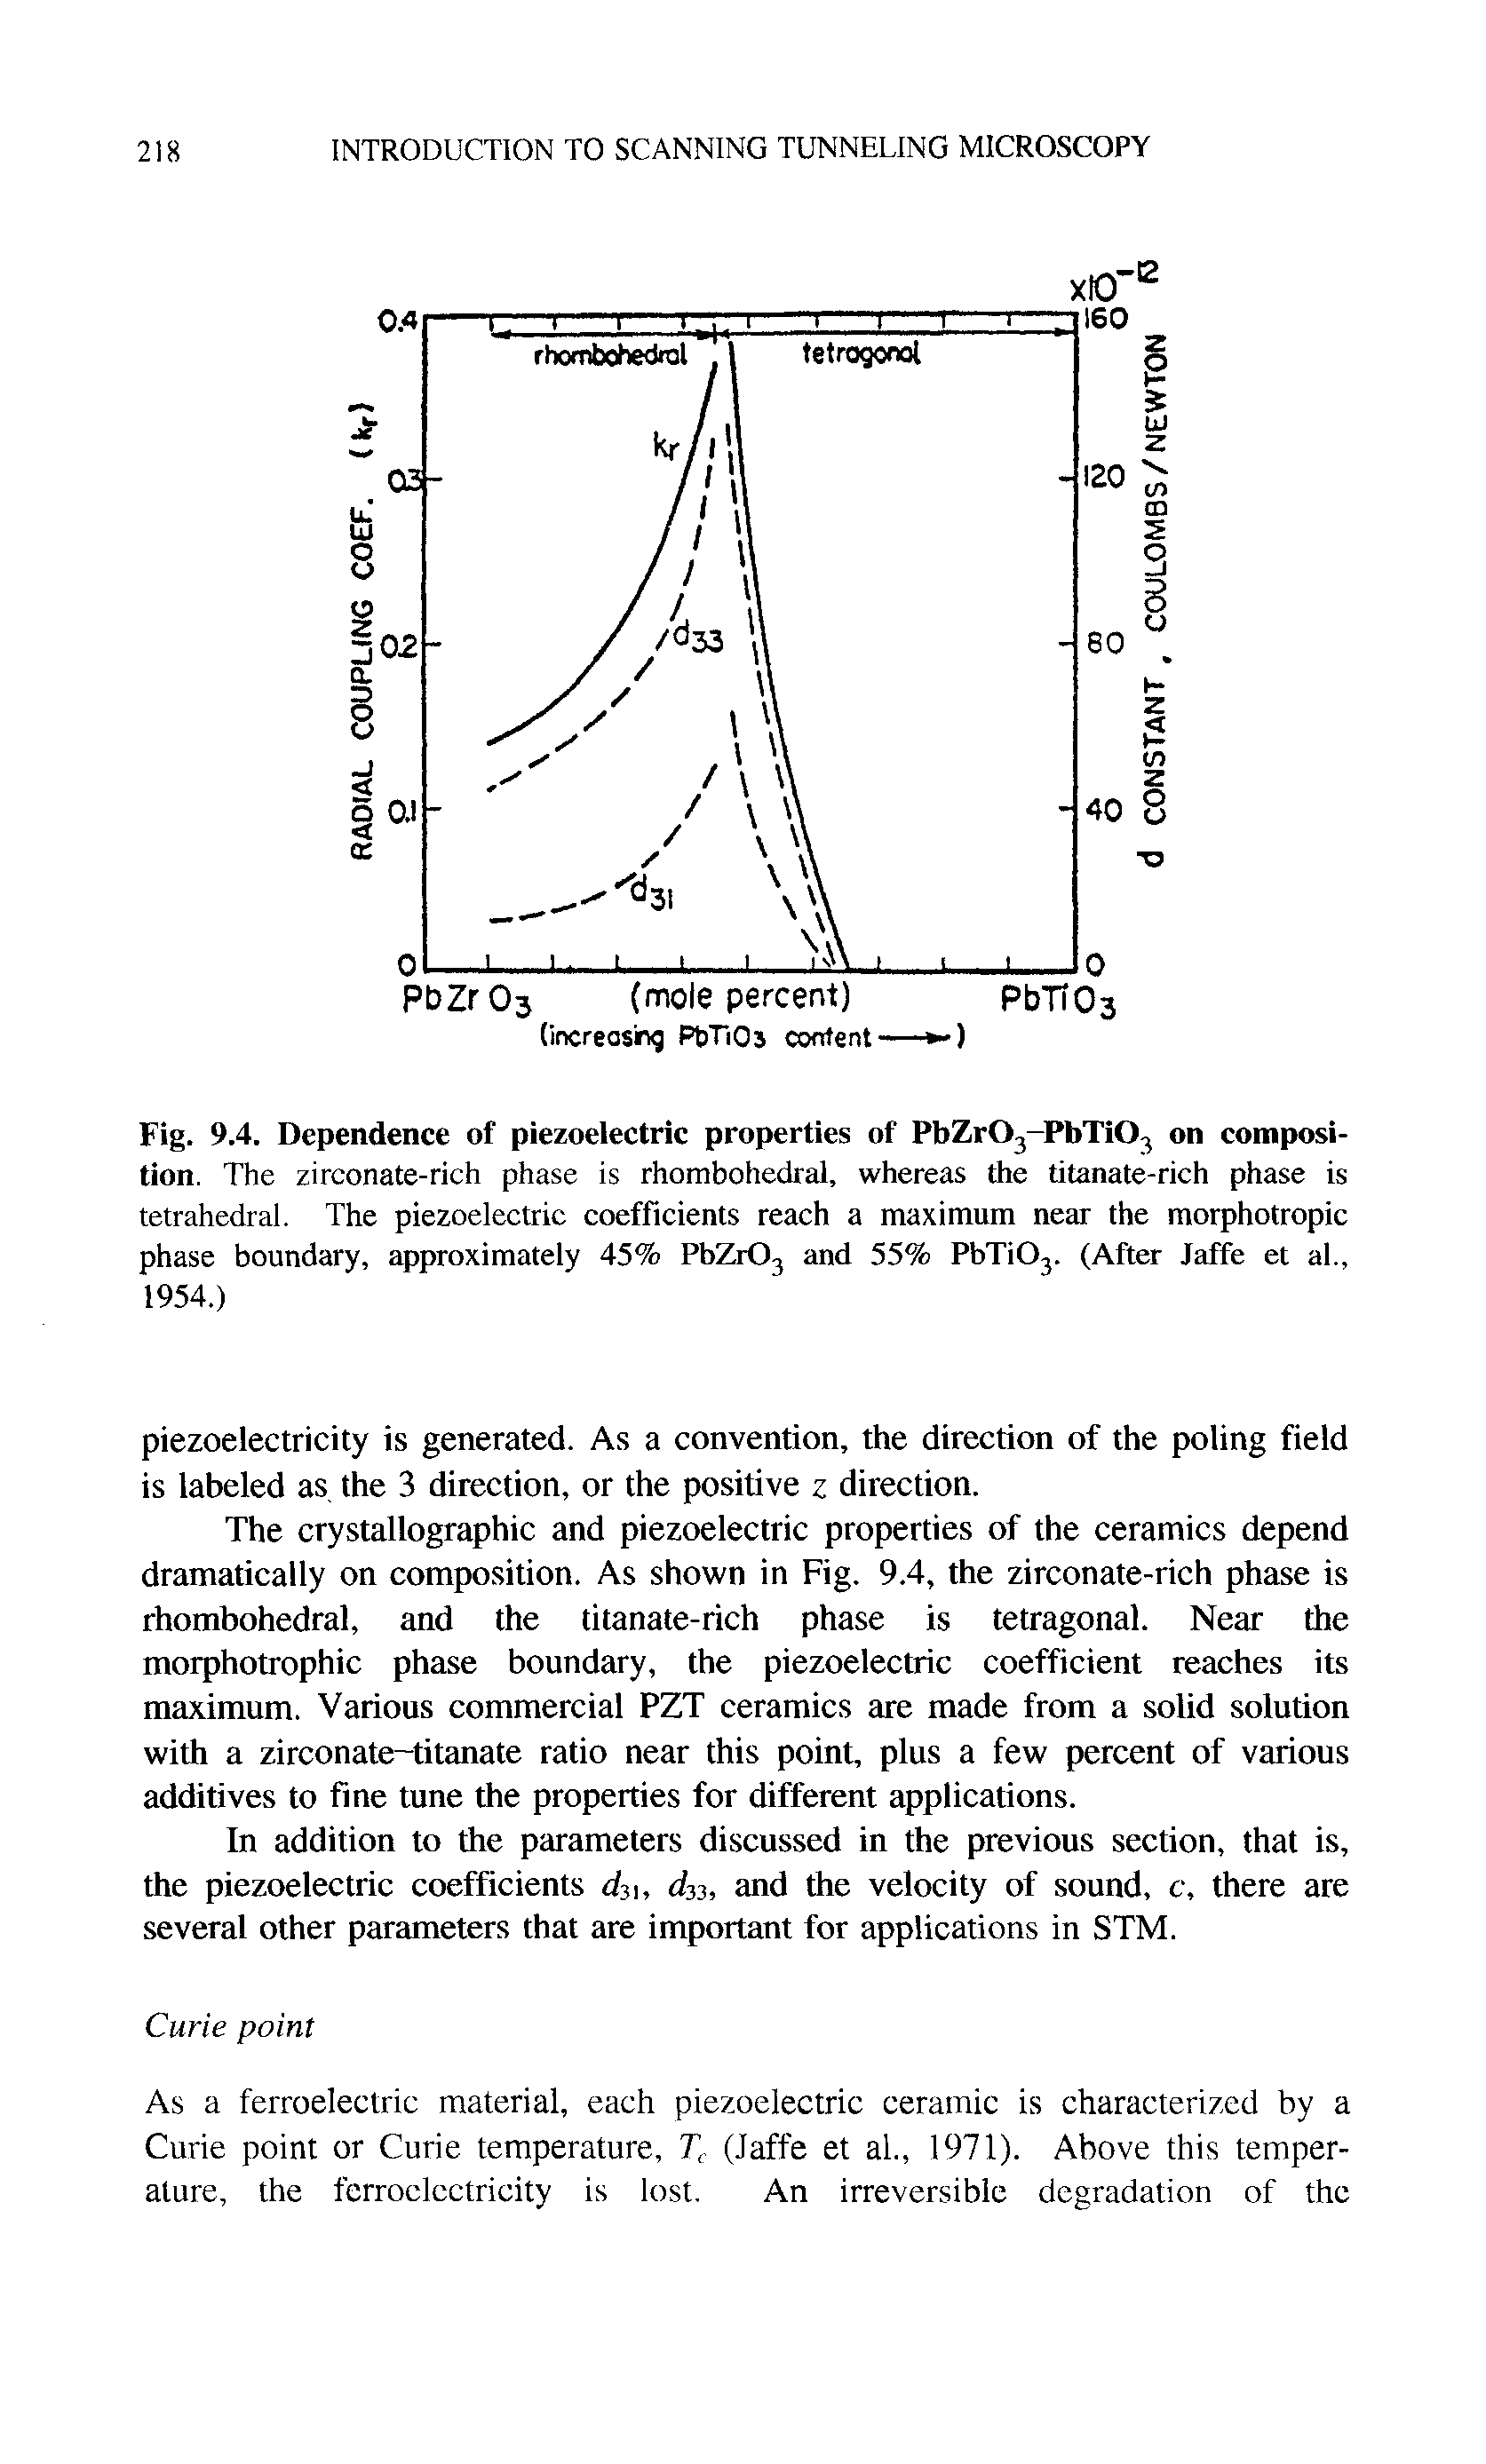 Fig. 9.4. Dependence of piezoelectric properties of PbZrOj-PbTiOj on composition. The zirconate-rich phase is rhombohedral, whereas the titanate-rich phase is tetrahedral. The piezoelectric coefficients reach a maximum near the morphotropic phase boundary, approximately 45% PbZrOj and 55% PbTiOj. (After Jaffe et al., 1954.)...